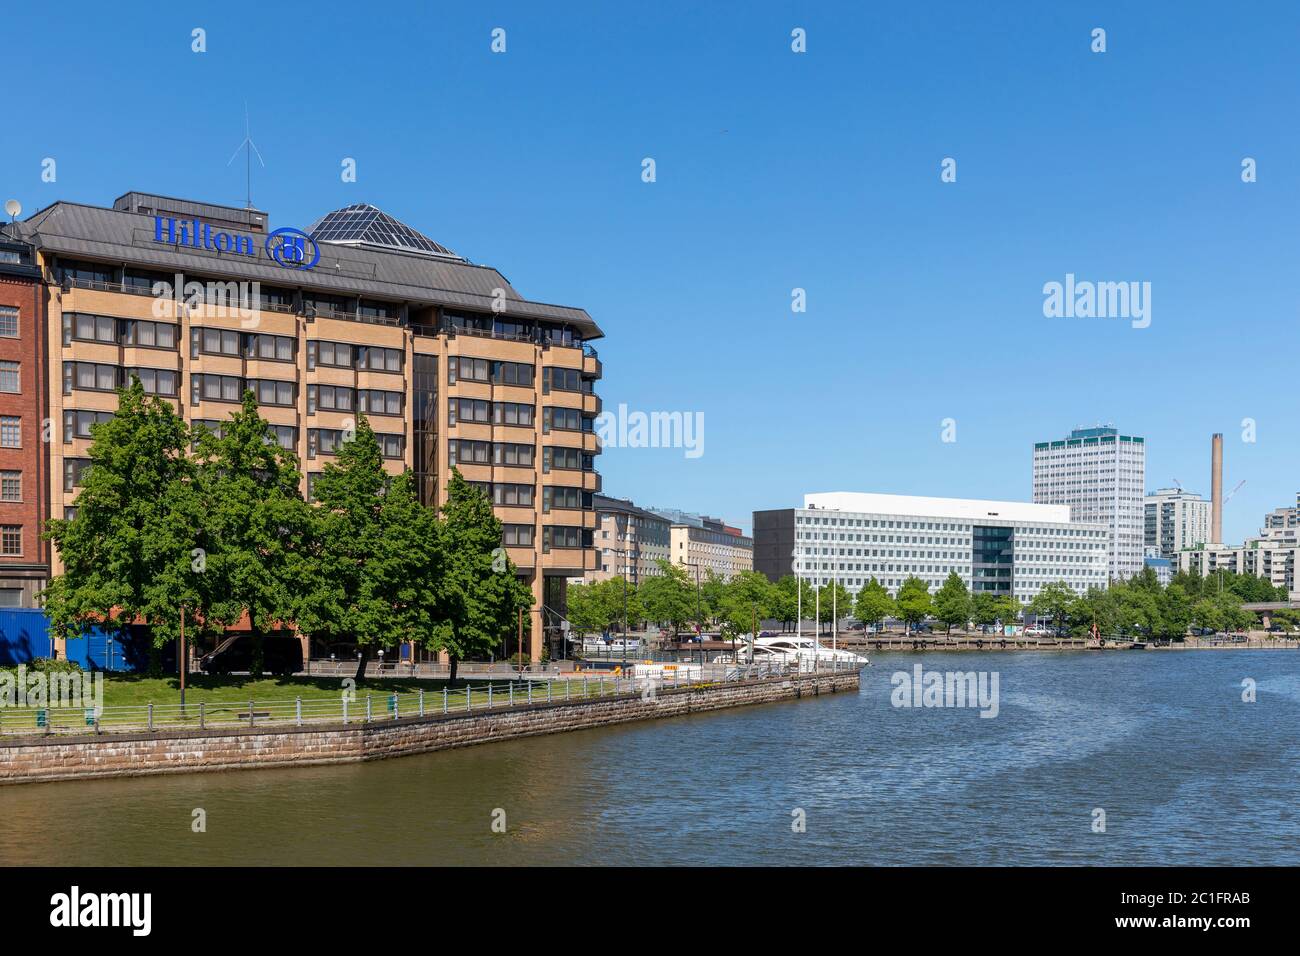 Siltavuorensalmi -strait leads waterway from baltic sea to heart of Helsinki. Waterfront buildings include hotels, offices and residential buildings. Stock Photo